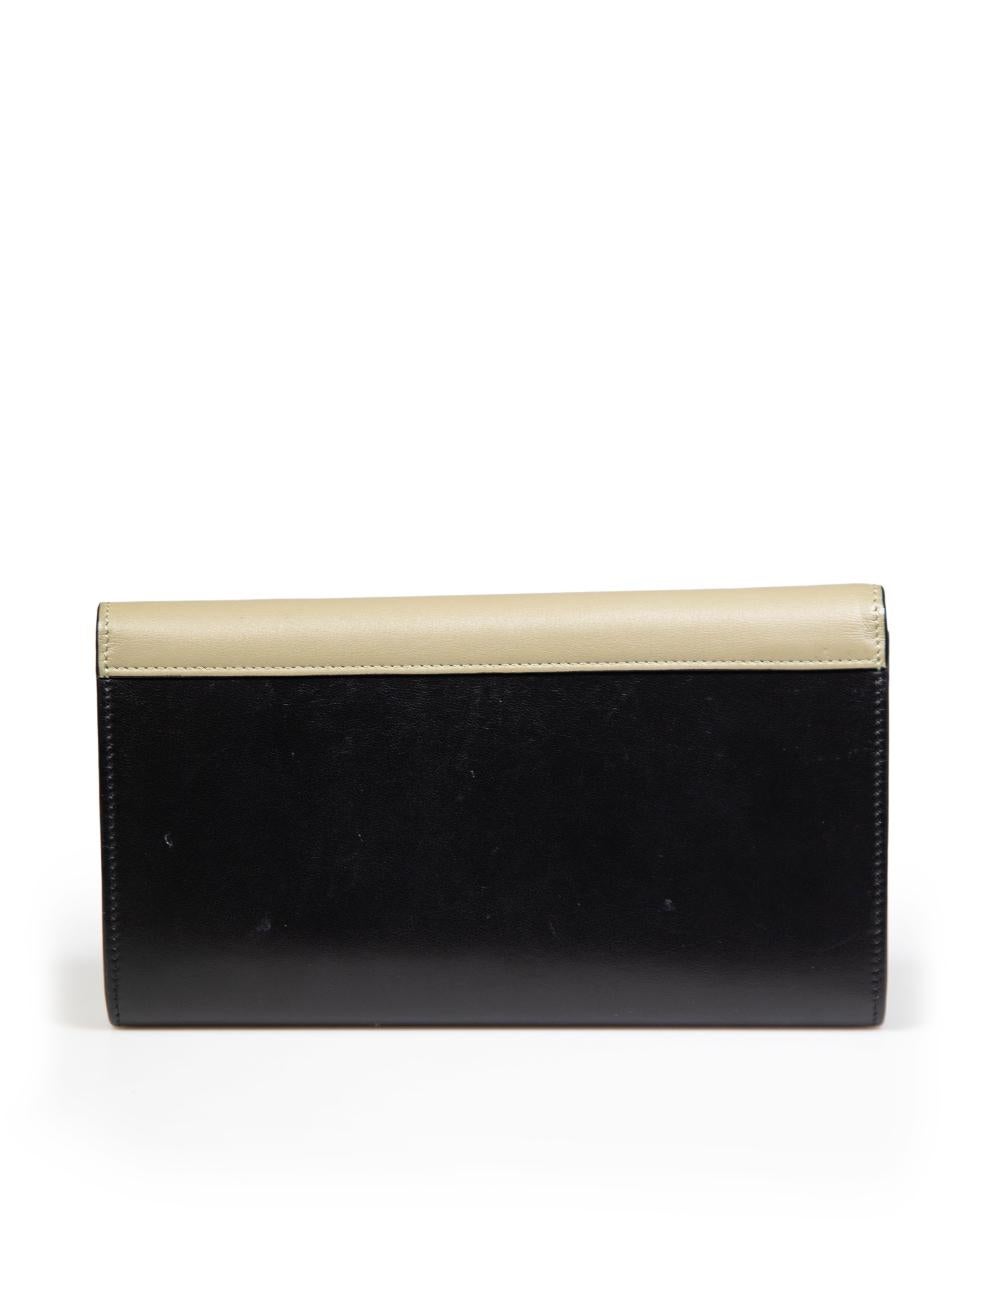 Céline Tricolor Leather Envelope Wallet In Excellent Condition For Sale In London, GB